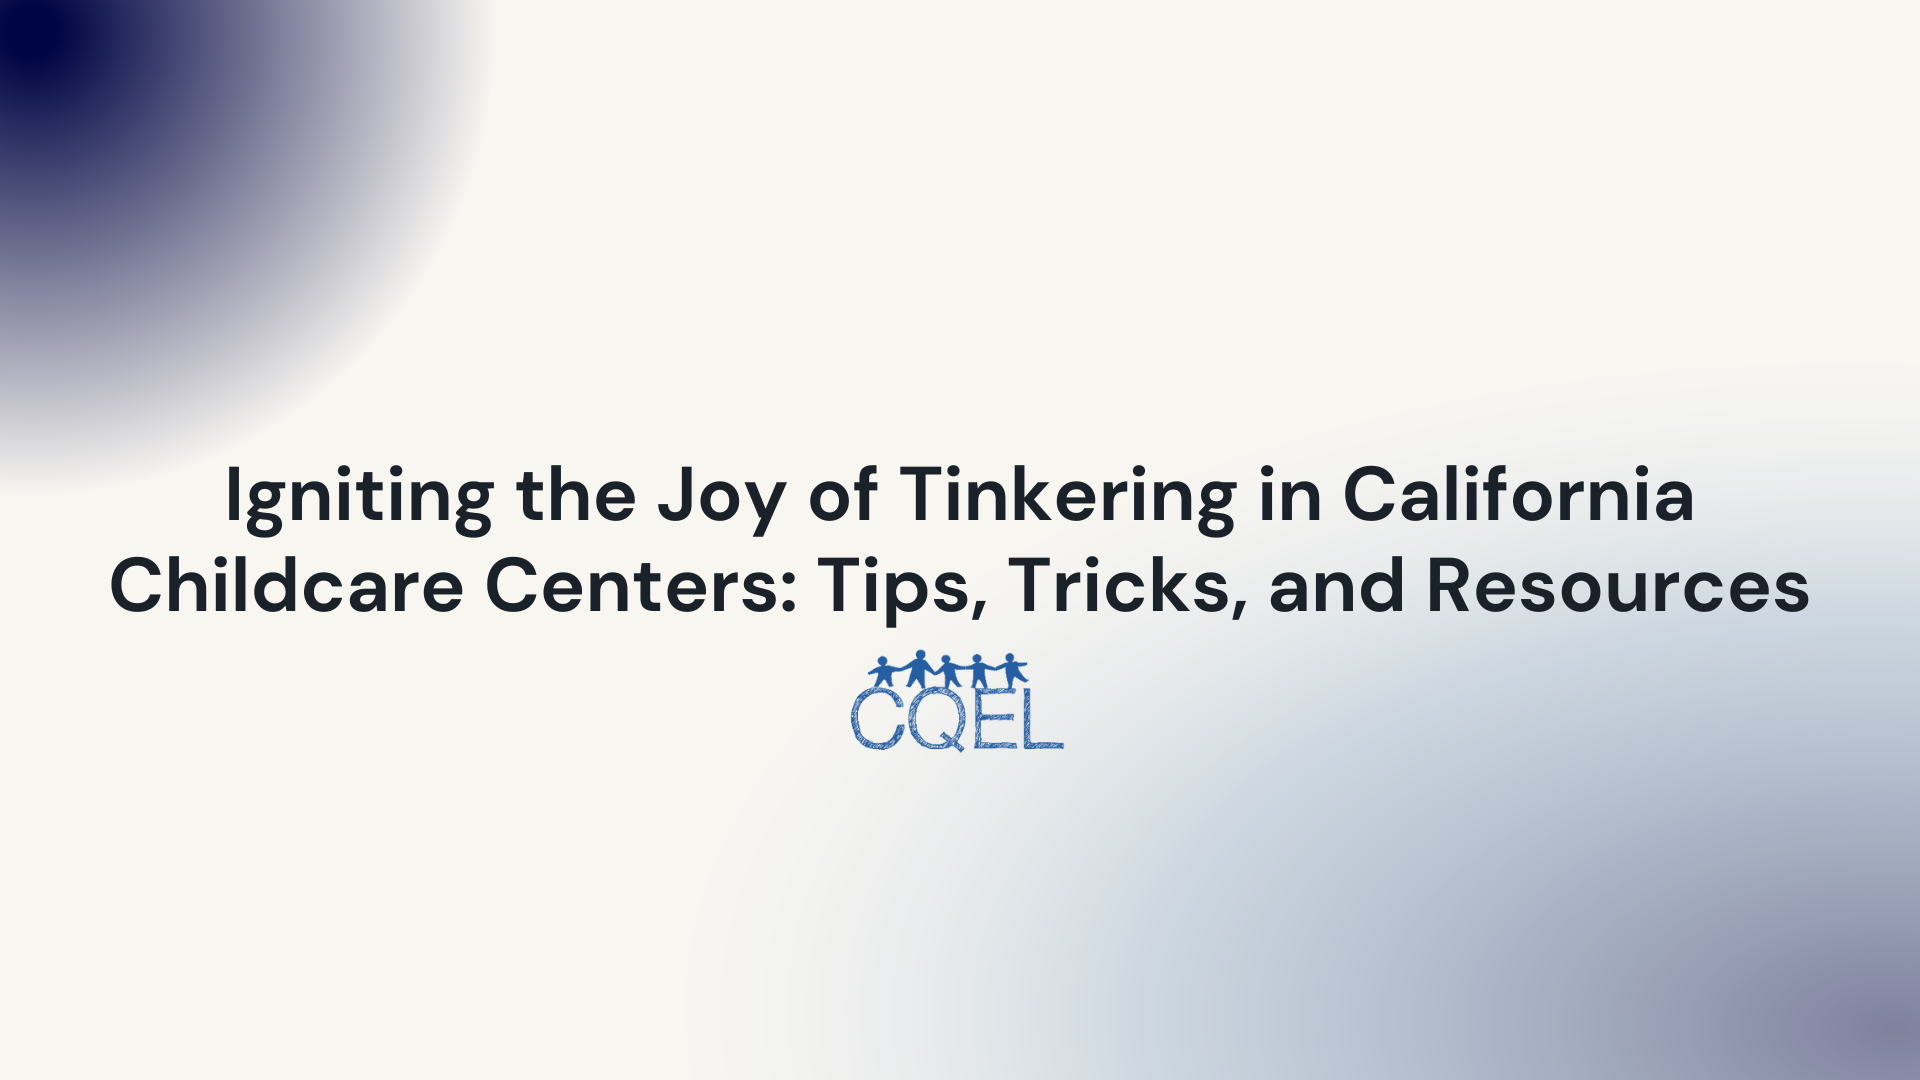 Igniting the Joy of Tinkering in Childcare Centers: Tips, Tricks, and Resources